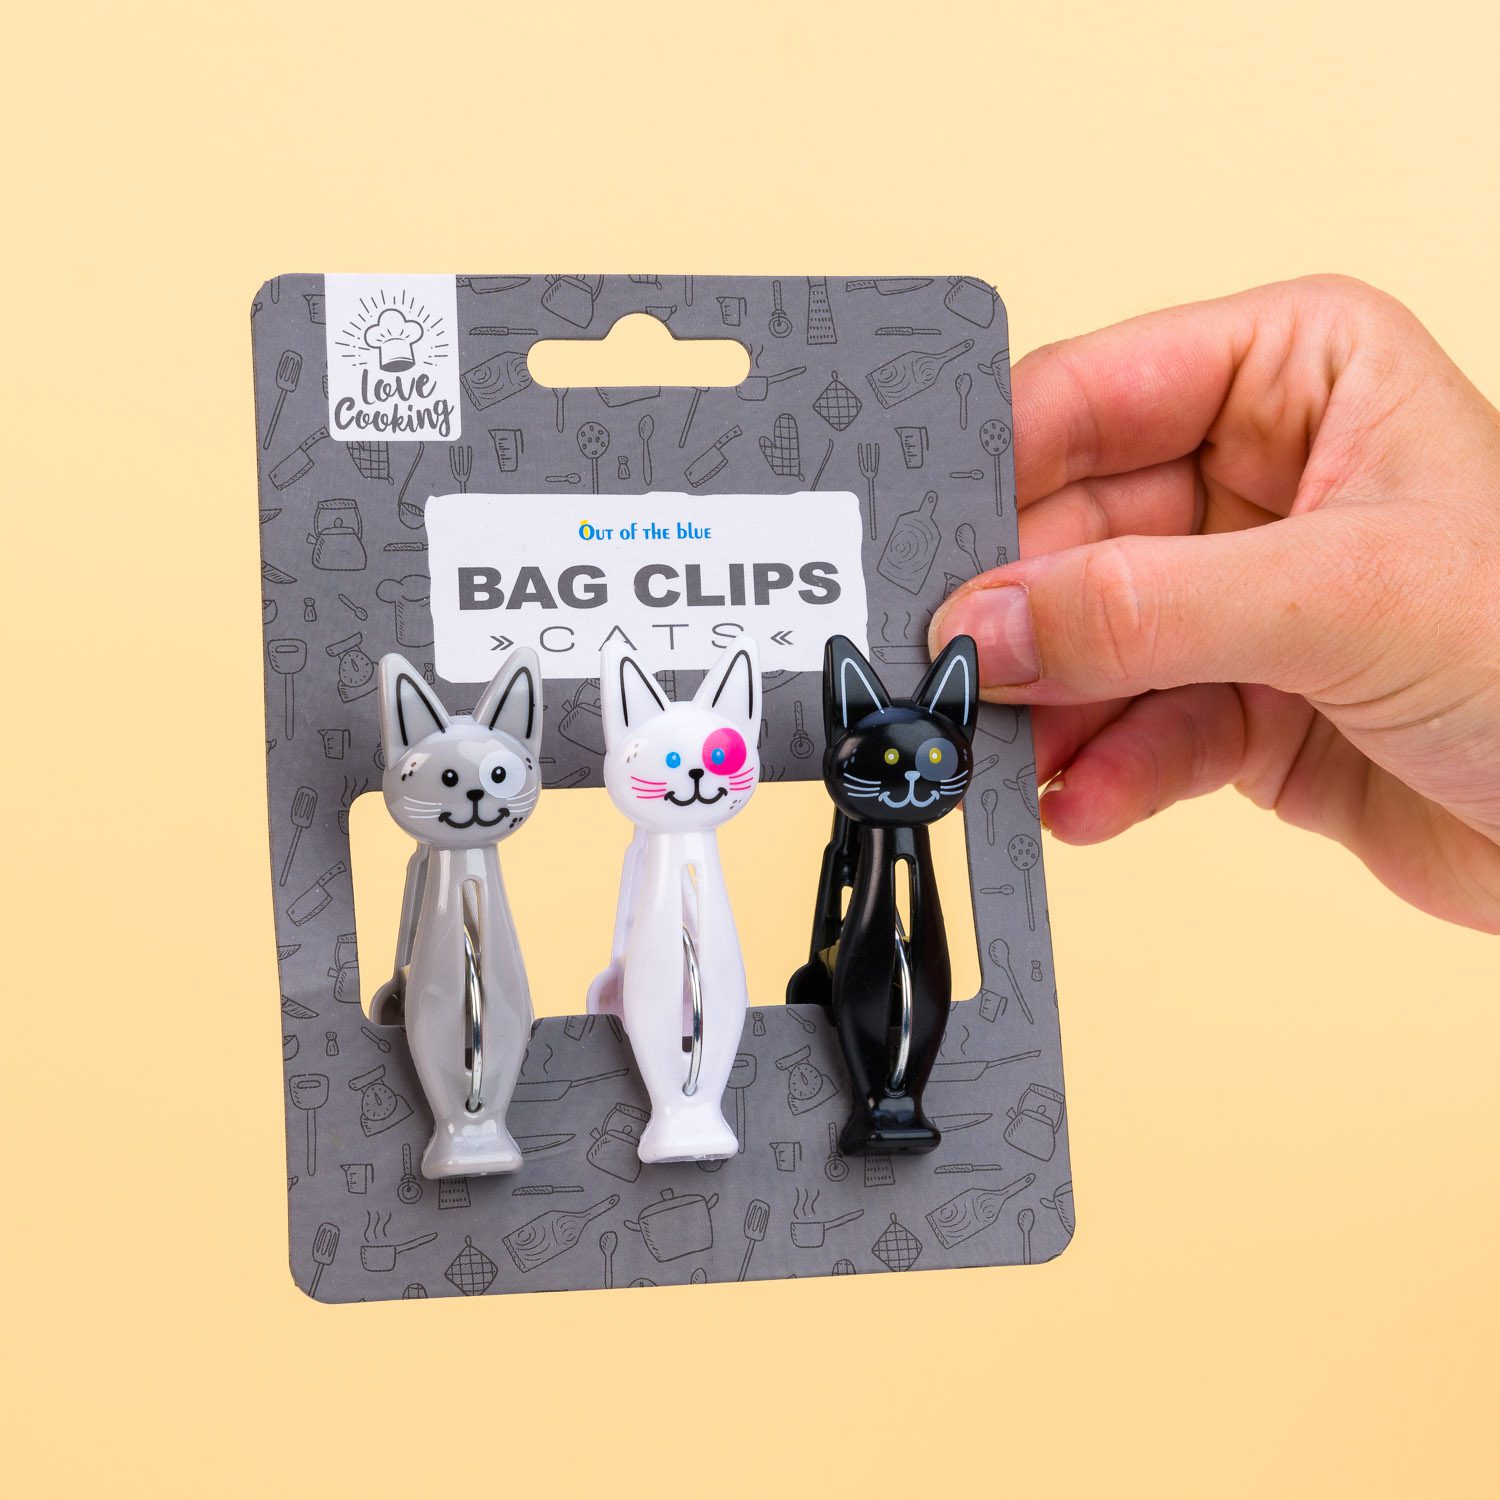 454755-Out of the blue-Bag Clips, Cats-1